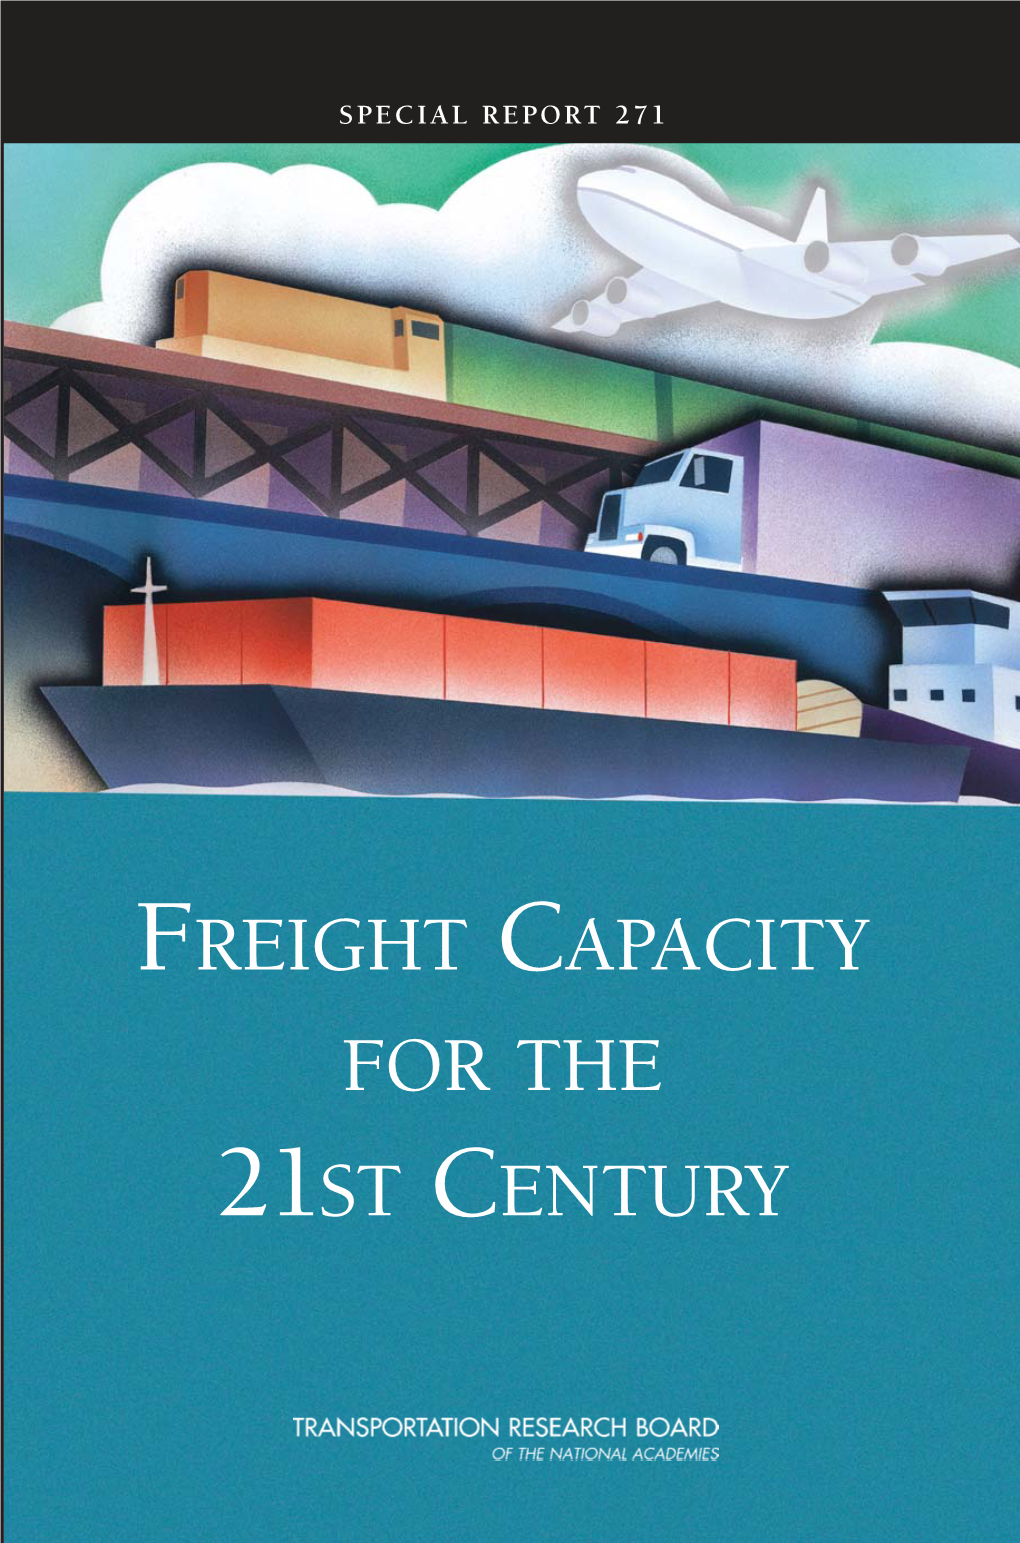 FREIGHT CAPACITY for the 21ST CENTURY 51111 C2 Xii 3/31/03 4:20 PM Page C2